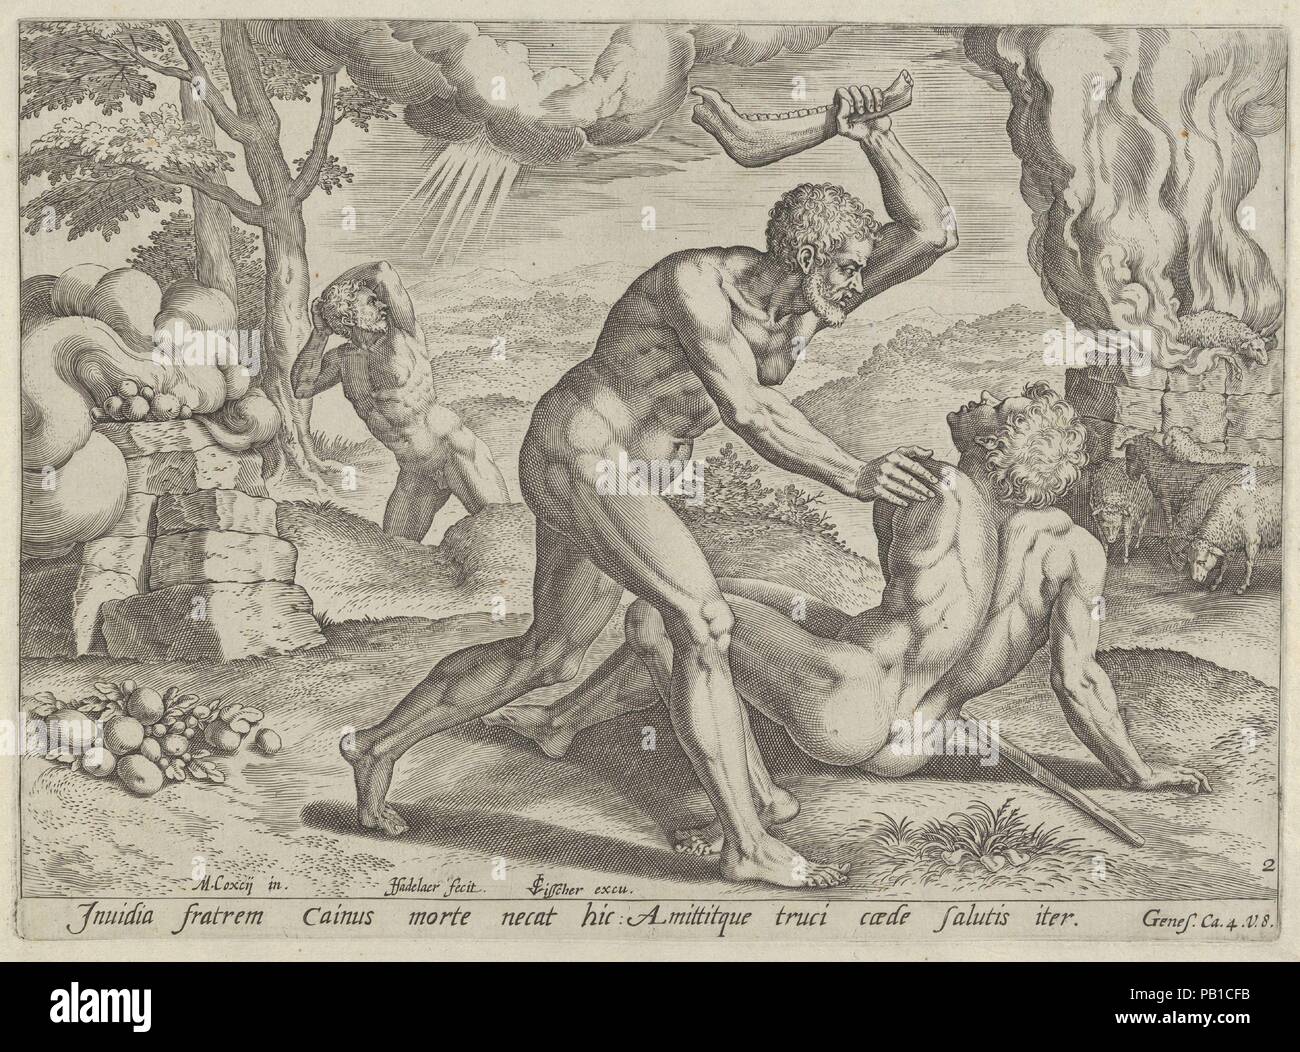 Cain murdering Abel (plate 2 from The Story of Cain and Abel). Artist: After Michiel Coxie (I) (Netherlandish, Mechelen ca. 1499-1592 Mechelen); Johann Sadeler I (Netherlandish, Brussels 1550-1600/1601 Venice). Dimensions: Plate: 8 × 11 in. (20.3 × 28 cm)  Sheet (including strip of paper pasted to left edge): 10 5/8 × 14 7/16 in. (27 × 36.6 cm). Publisher: Claes Jansz. Visscher (Dutch, Amsterdam 1586-1652 Amsterdam). Date: 1576. Museum: Metropolitan Museum of Art, New York, USA. Stock Photo